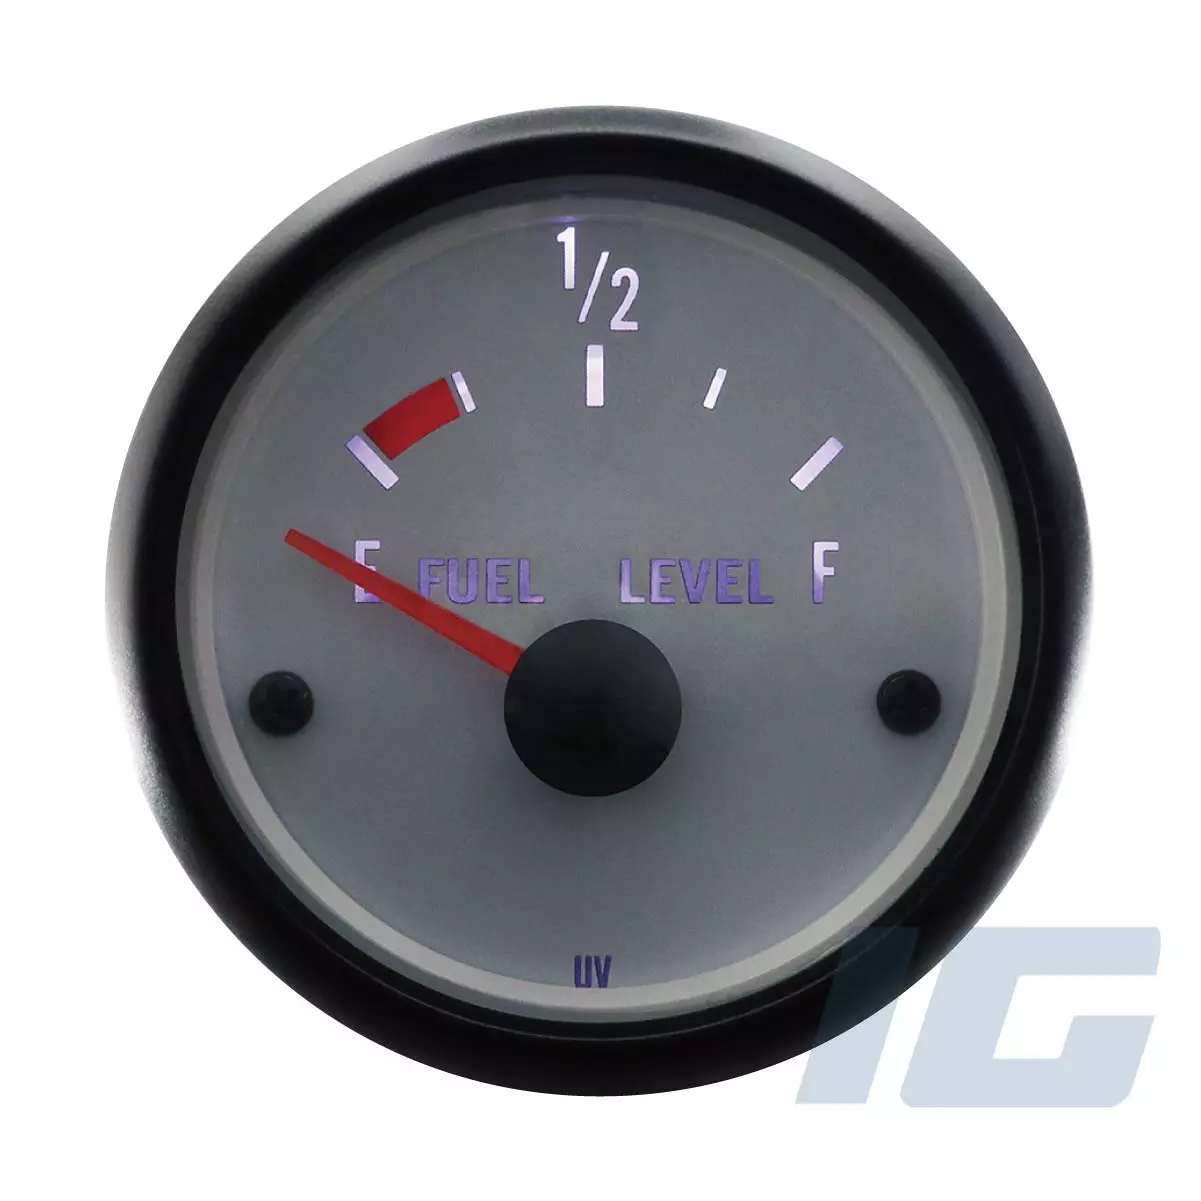 UNIVERSAL AFTERMARKET FUEL LEVEL GAUGE WITH FUEL LEVEL SENDER Aftermarket Gauges: Car, Truck, Digital, Automobile, Replacement